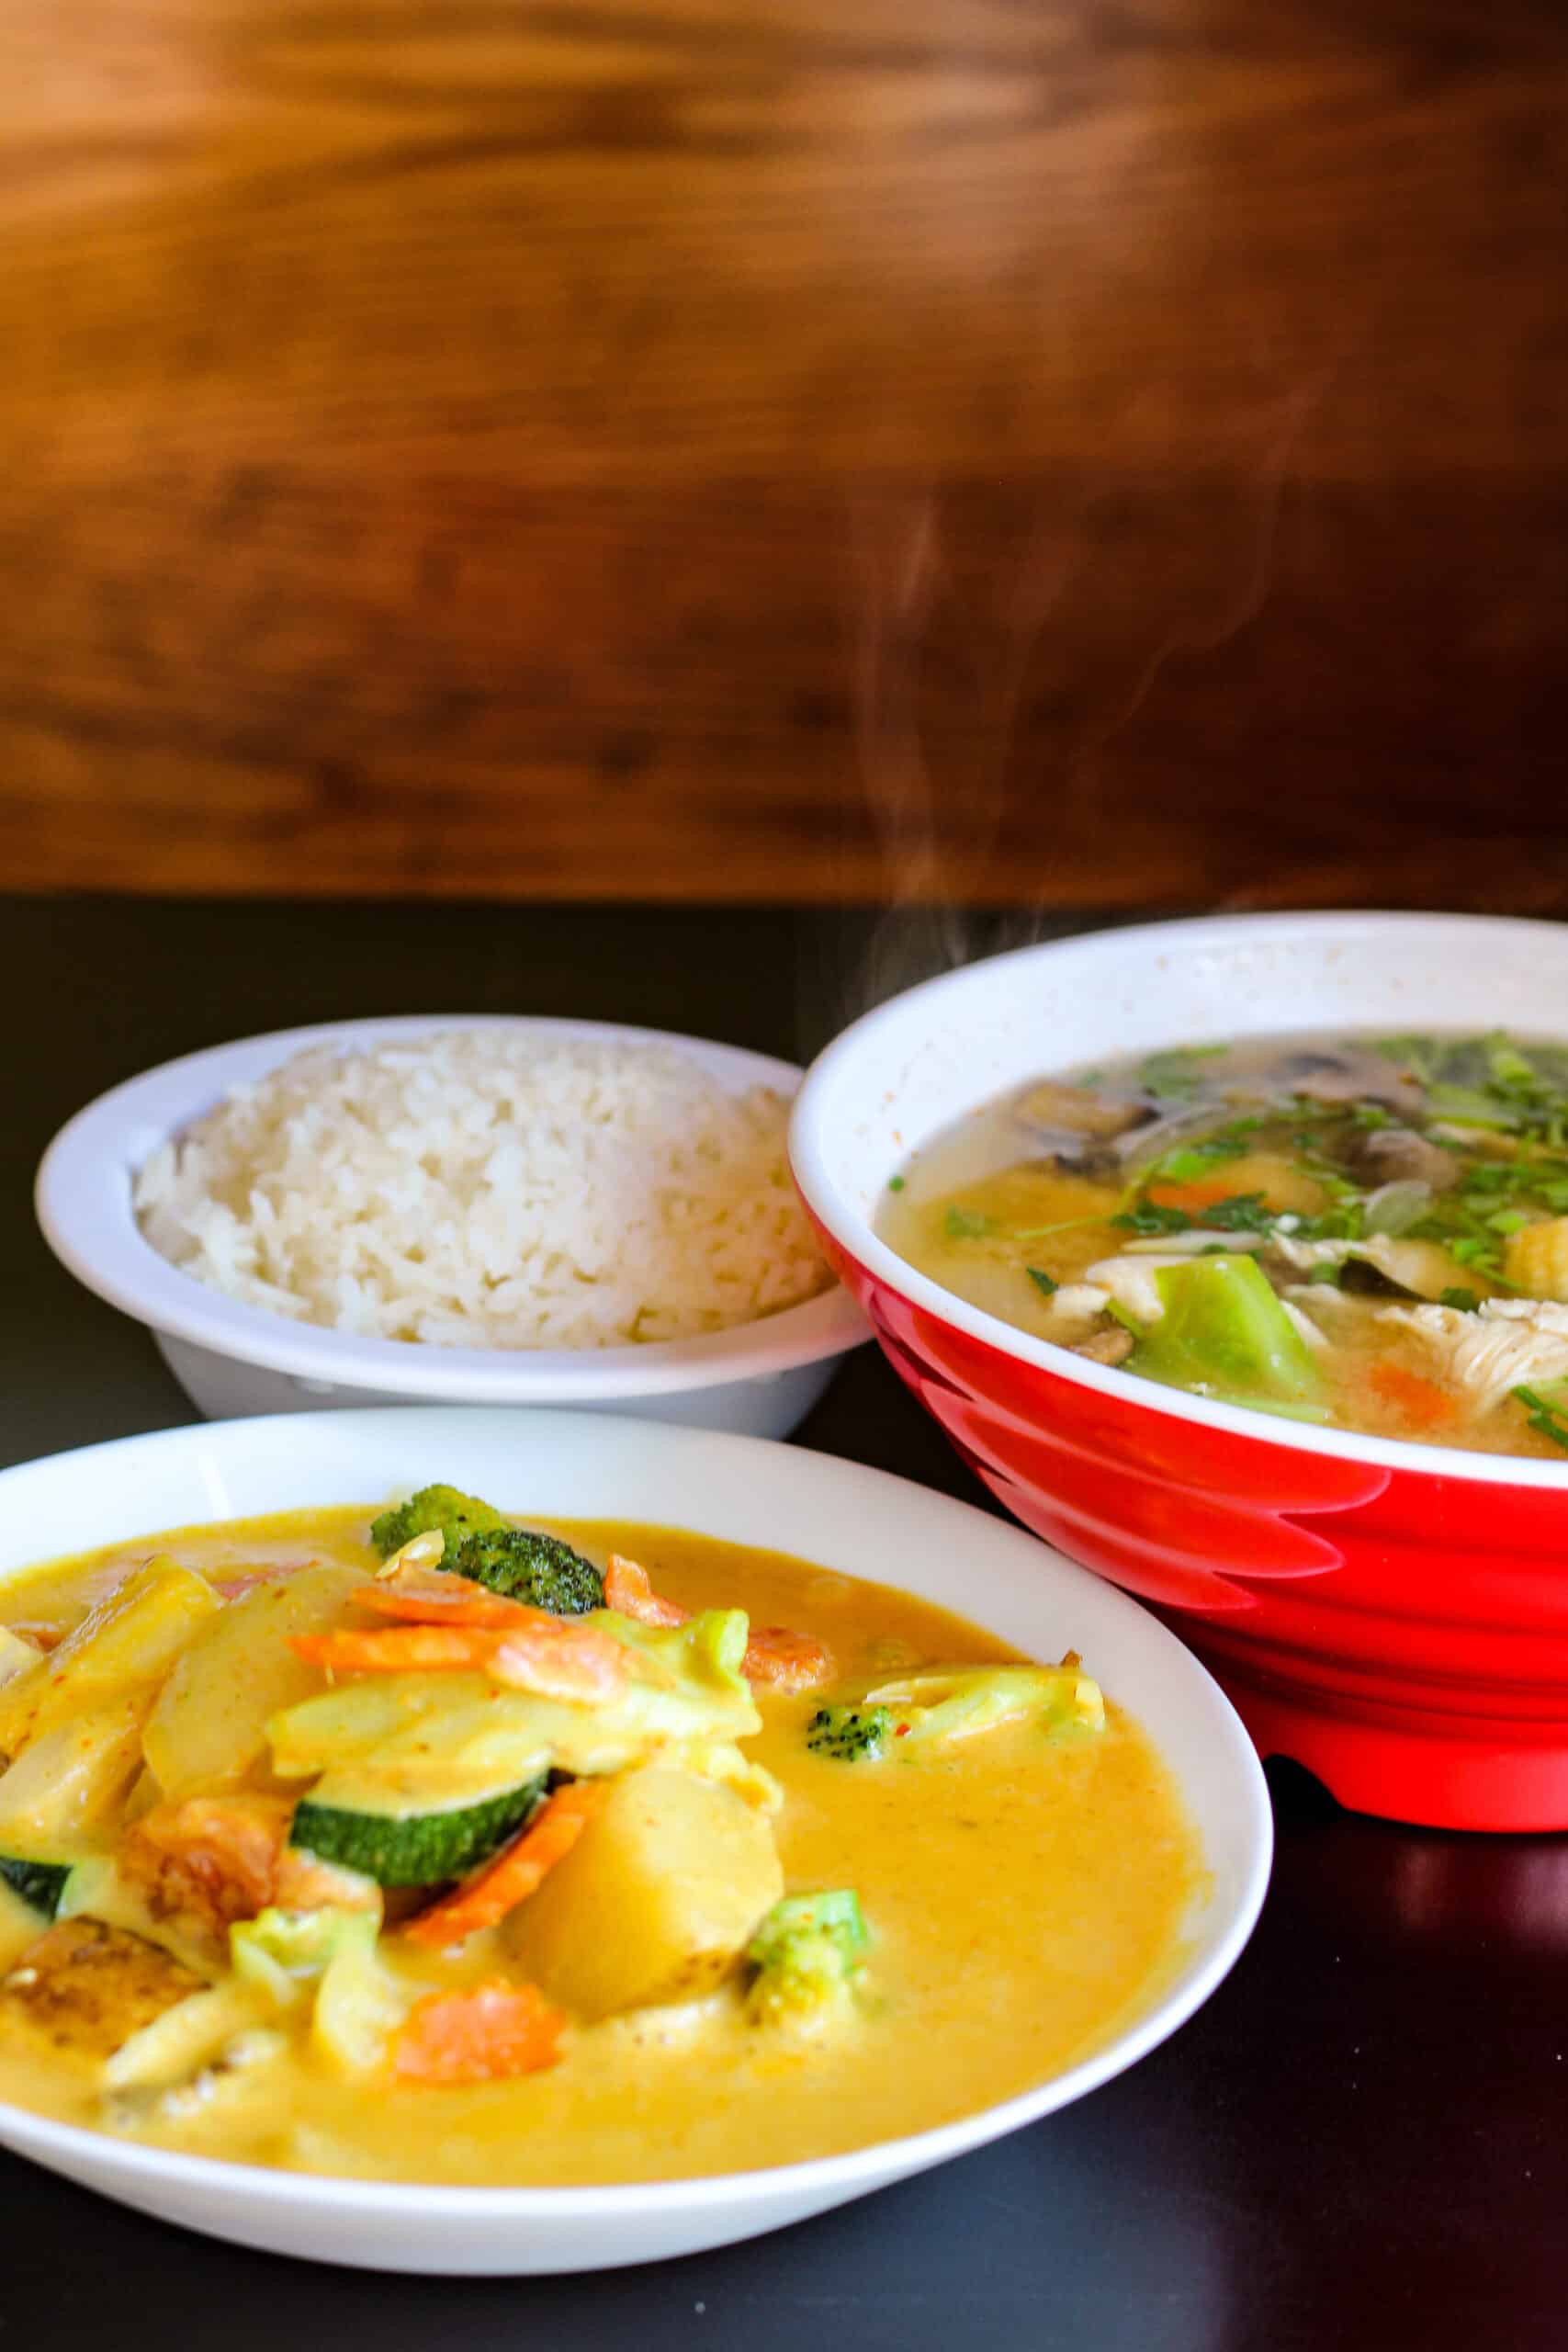 tea rose diner's yellow curry and mango curry